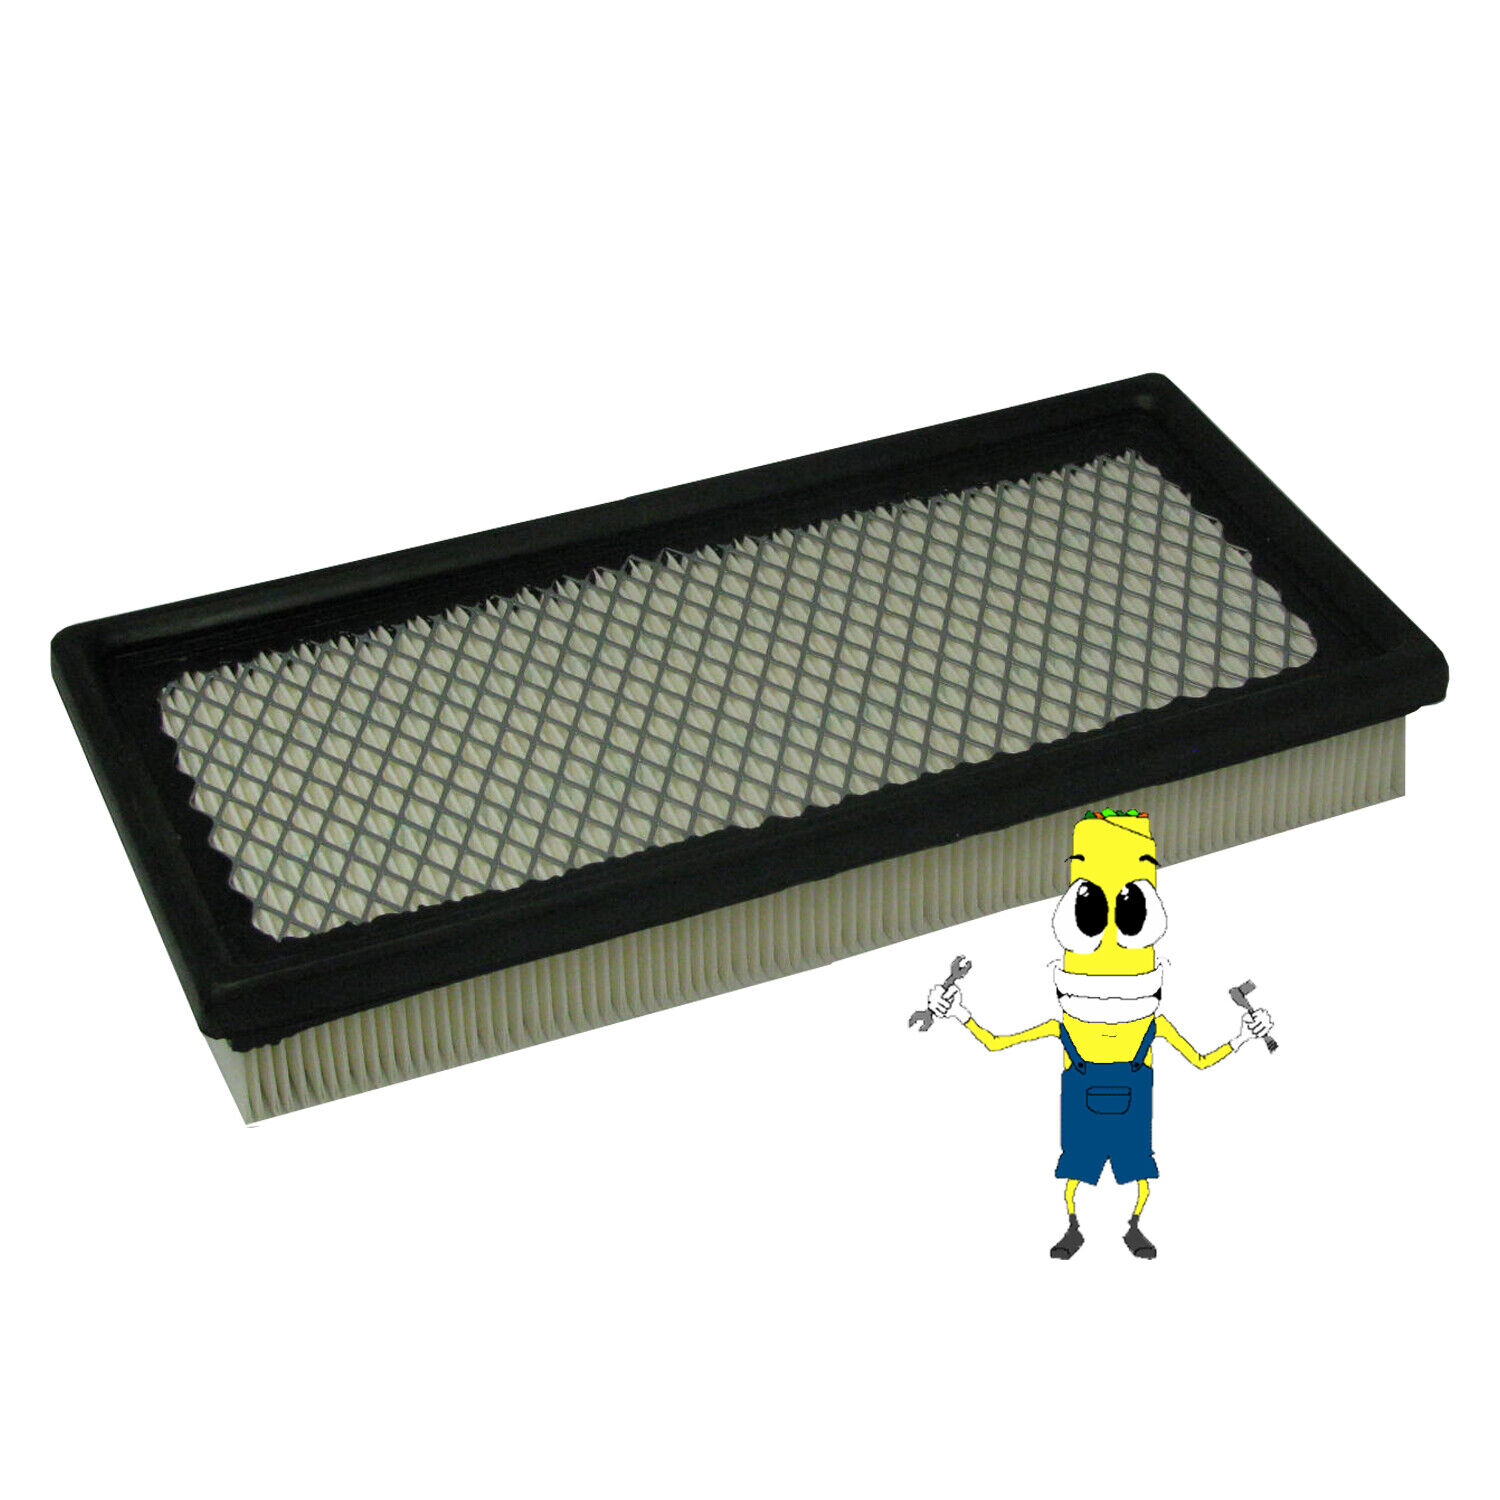 Premium Air Filter for Ford EXP 1984-1987 1.6L 1.9L Engines